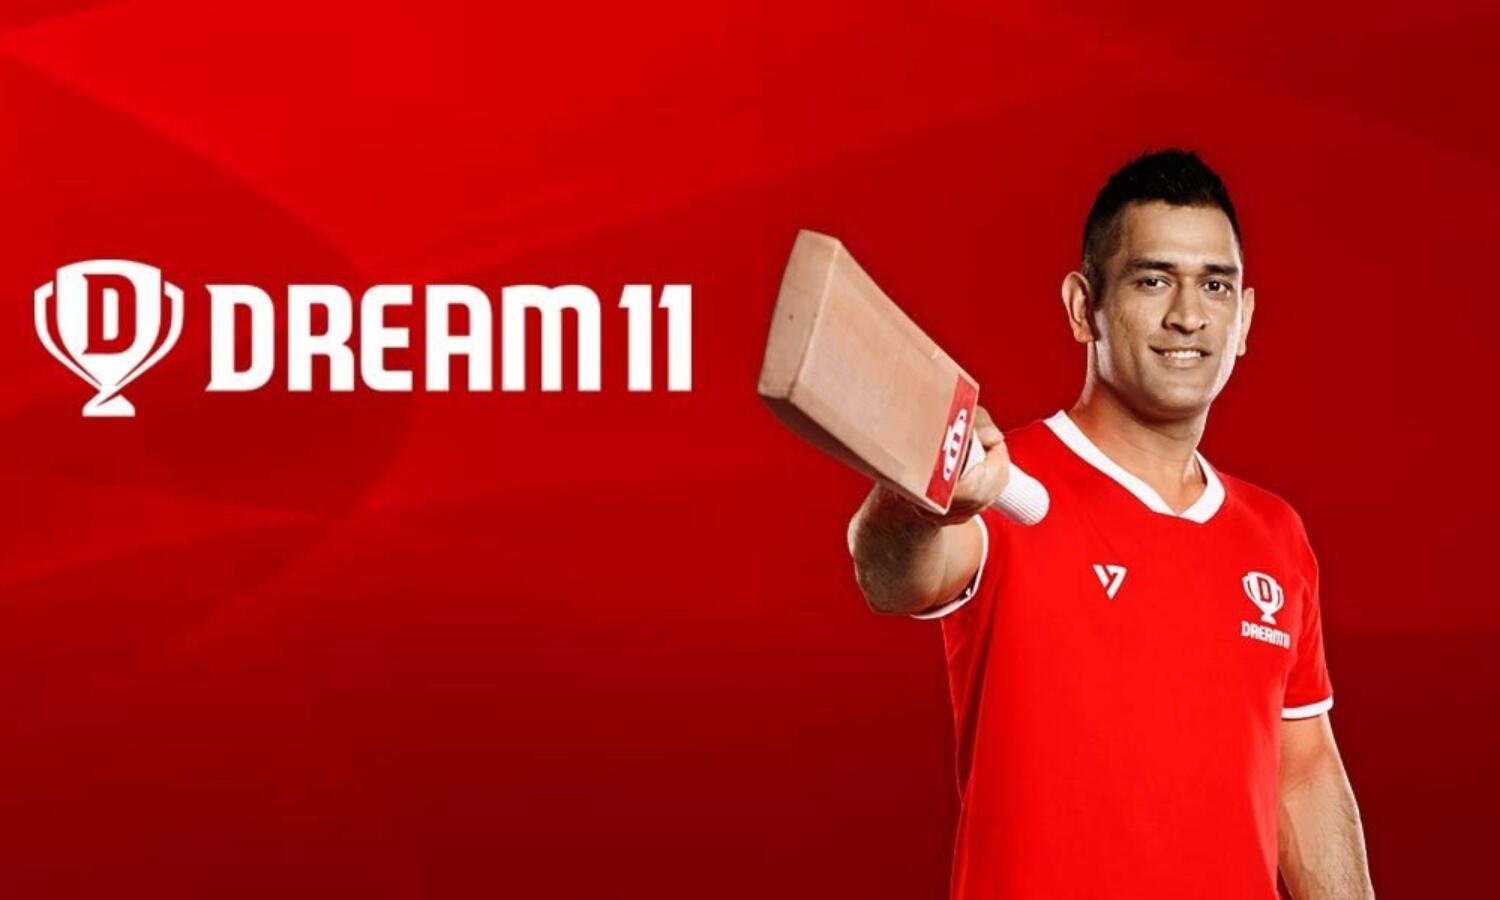 Which states have banned Dream11 in India?